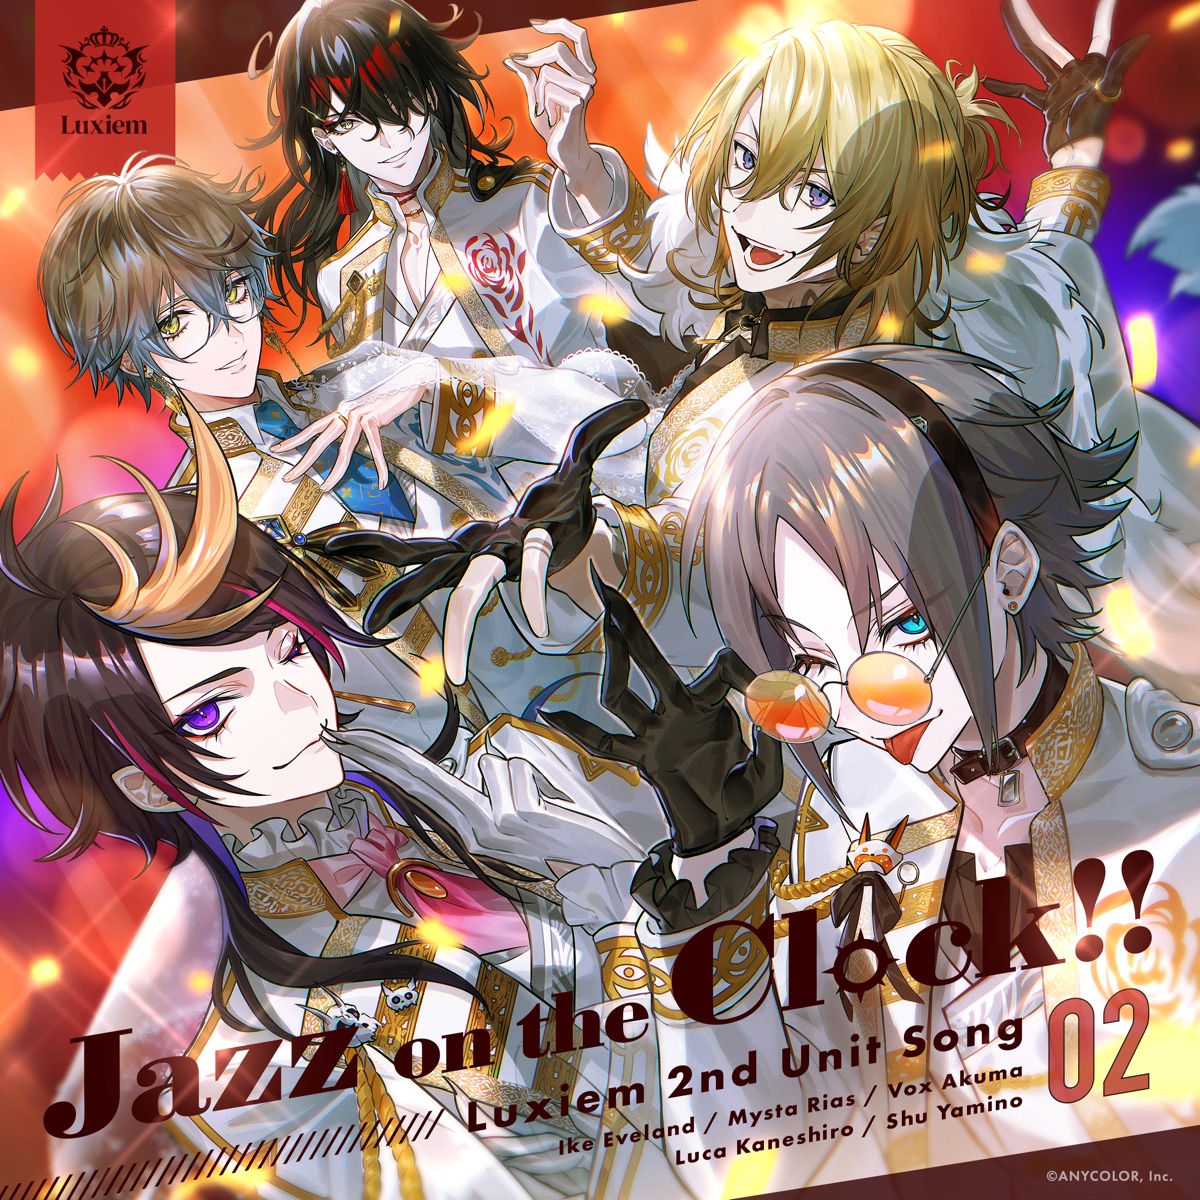 Cover art for『Luxiem - Jazz on the Clock!!』from the release『Jazz on the Clock!!